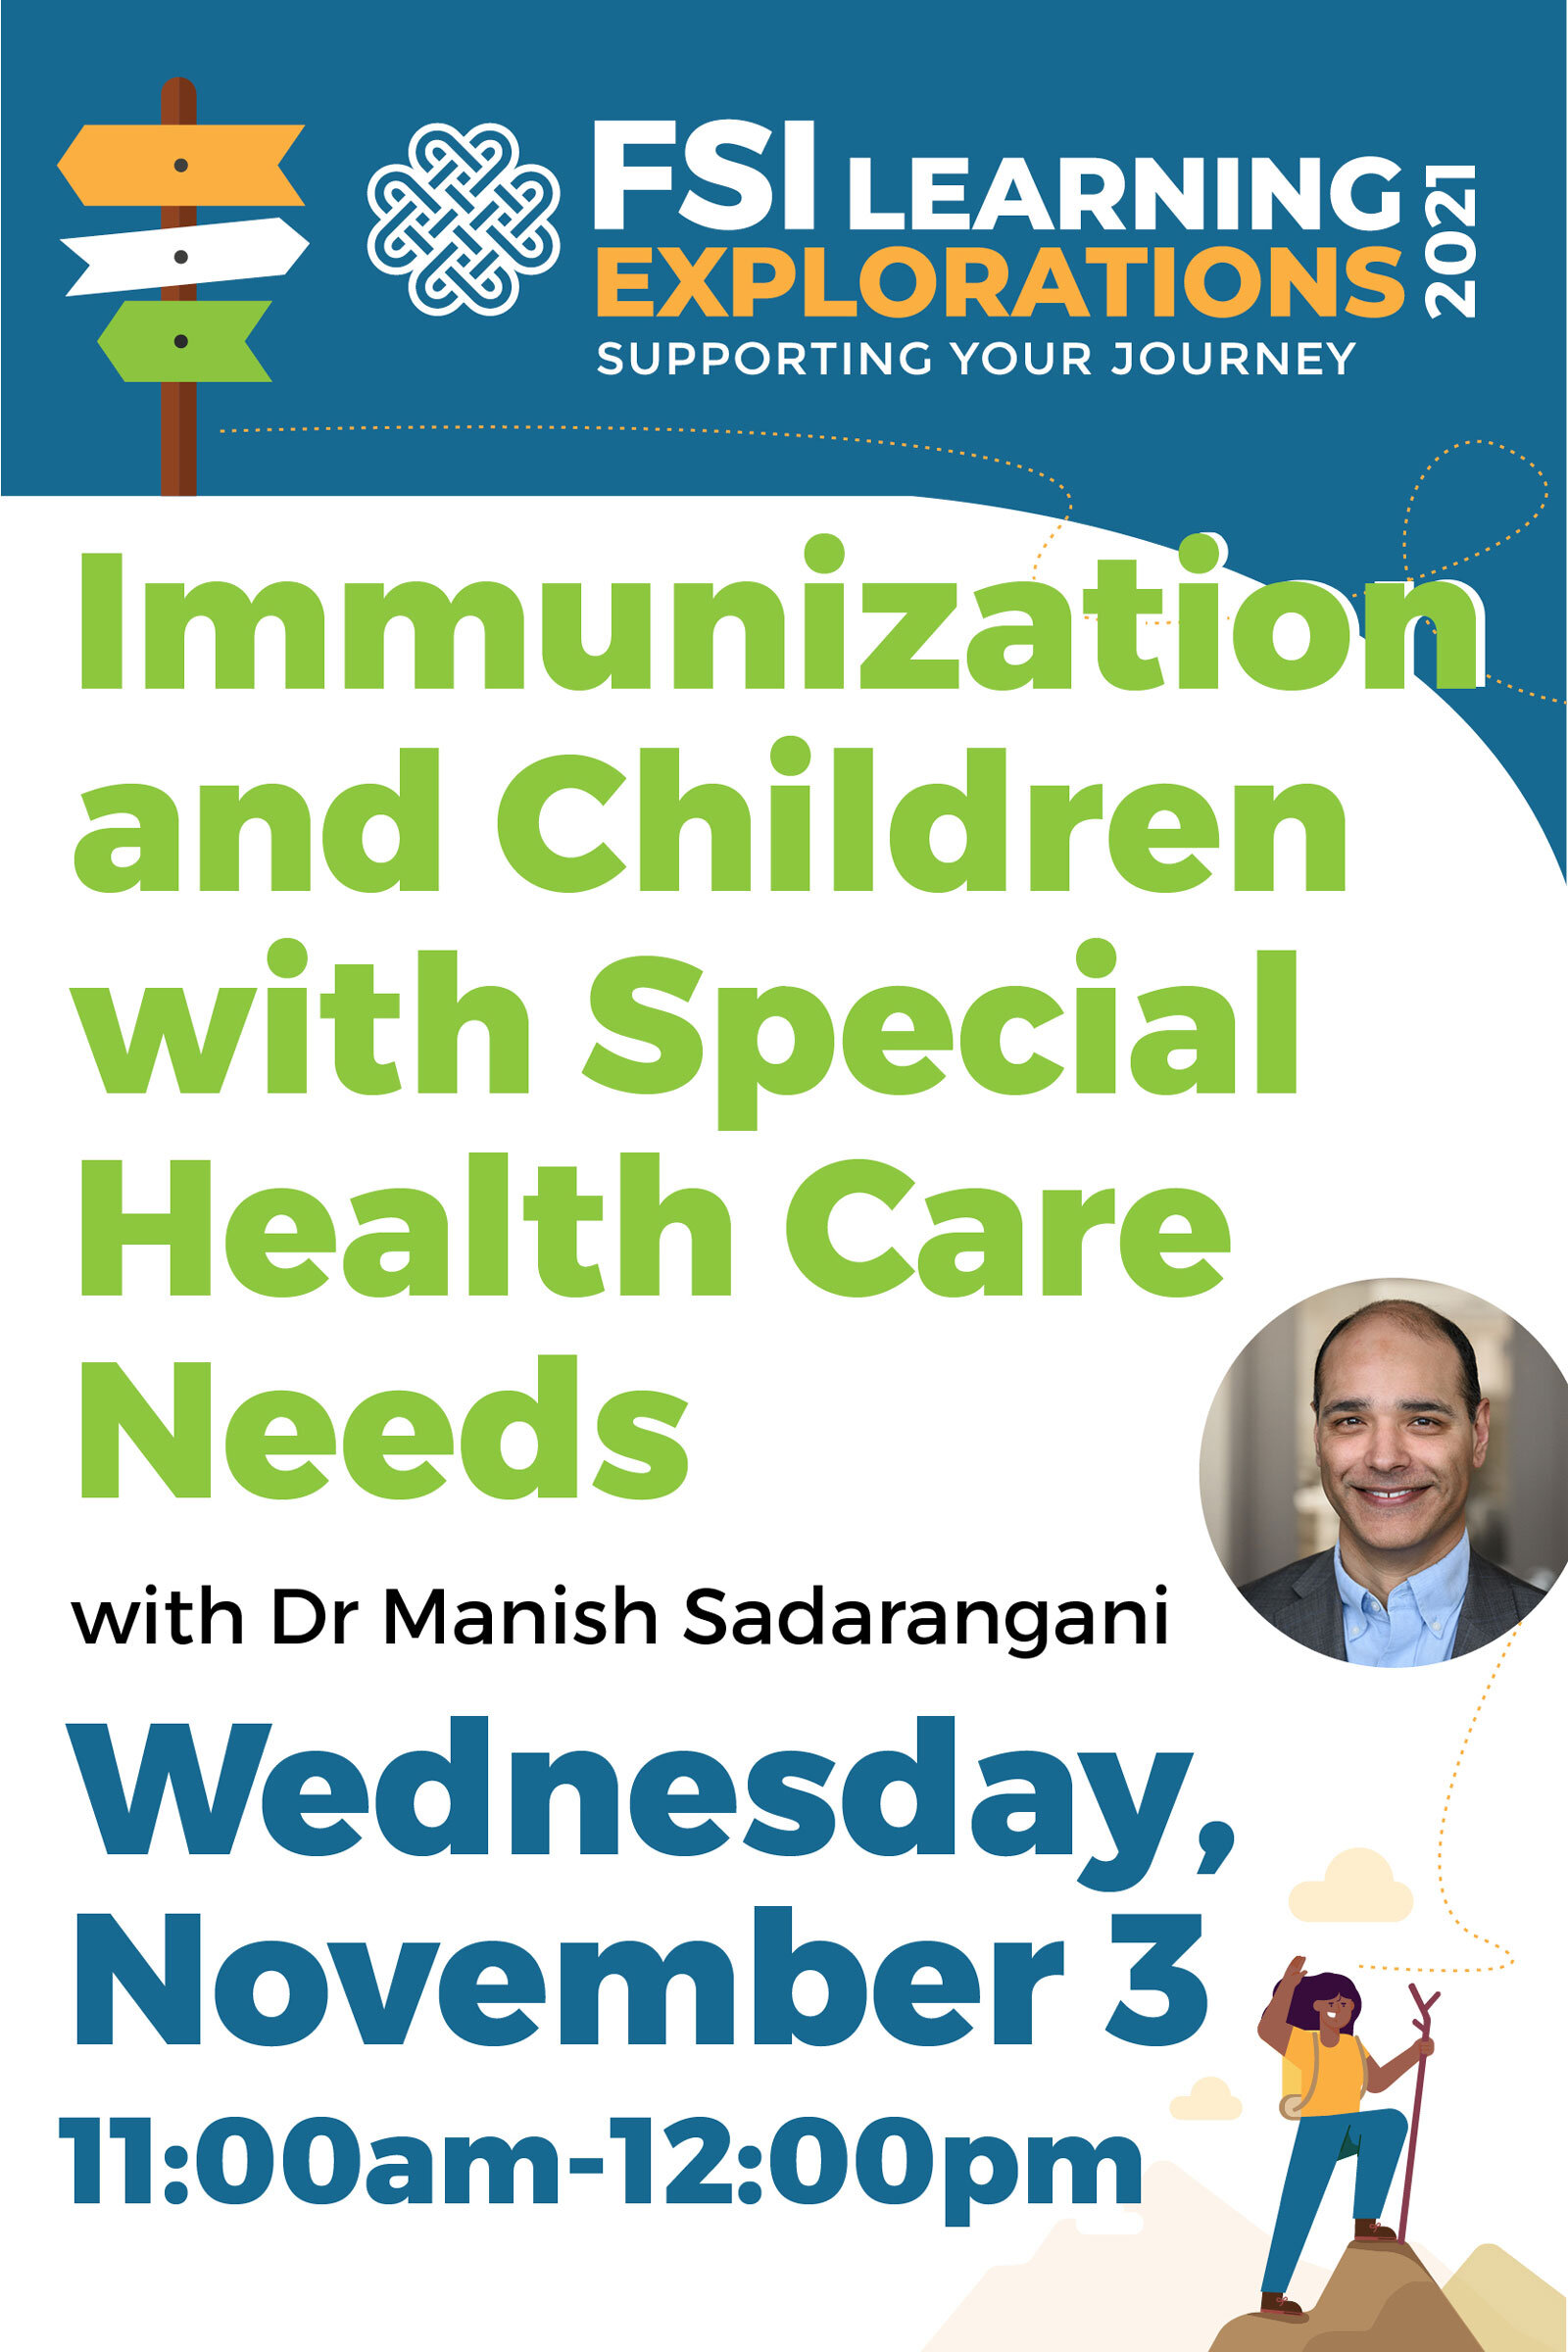 FSI Learning Explorations - Immunization and Children with Special Health Care Needs